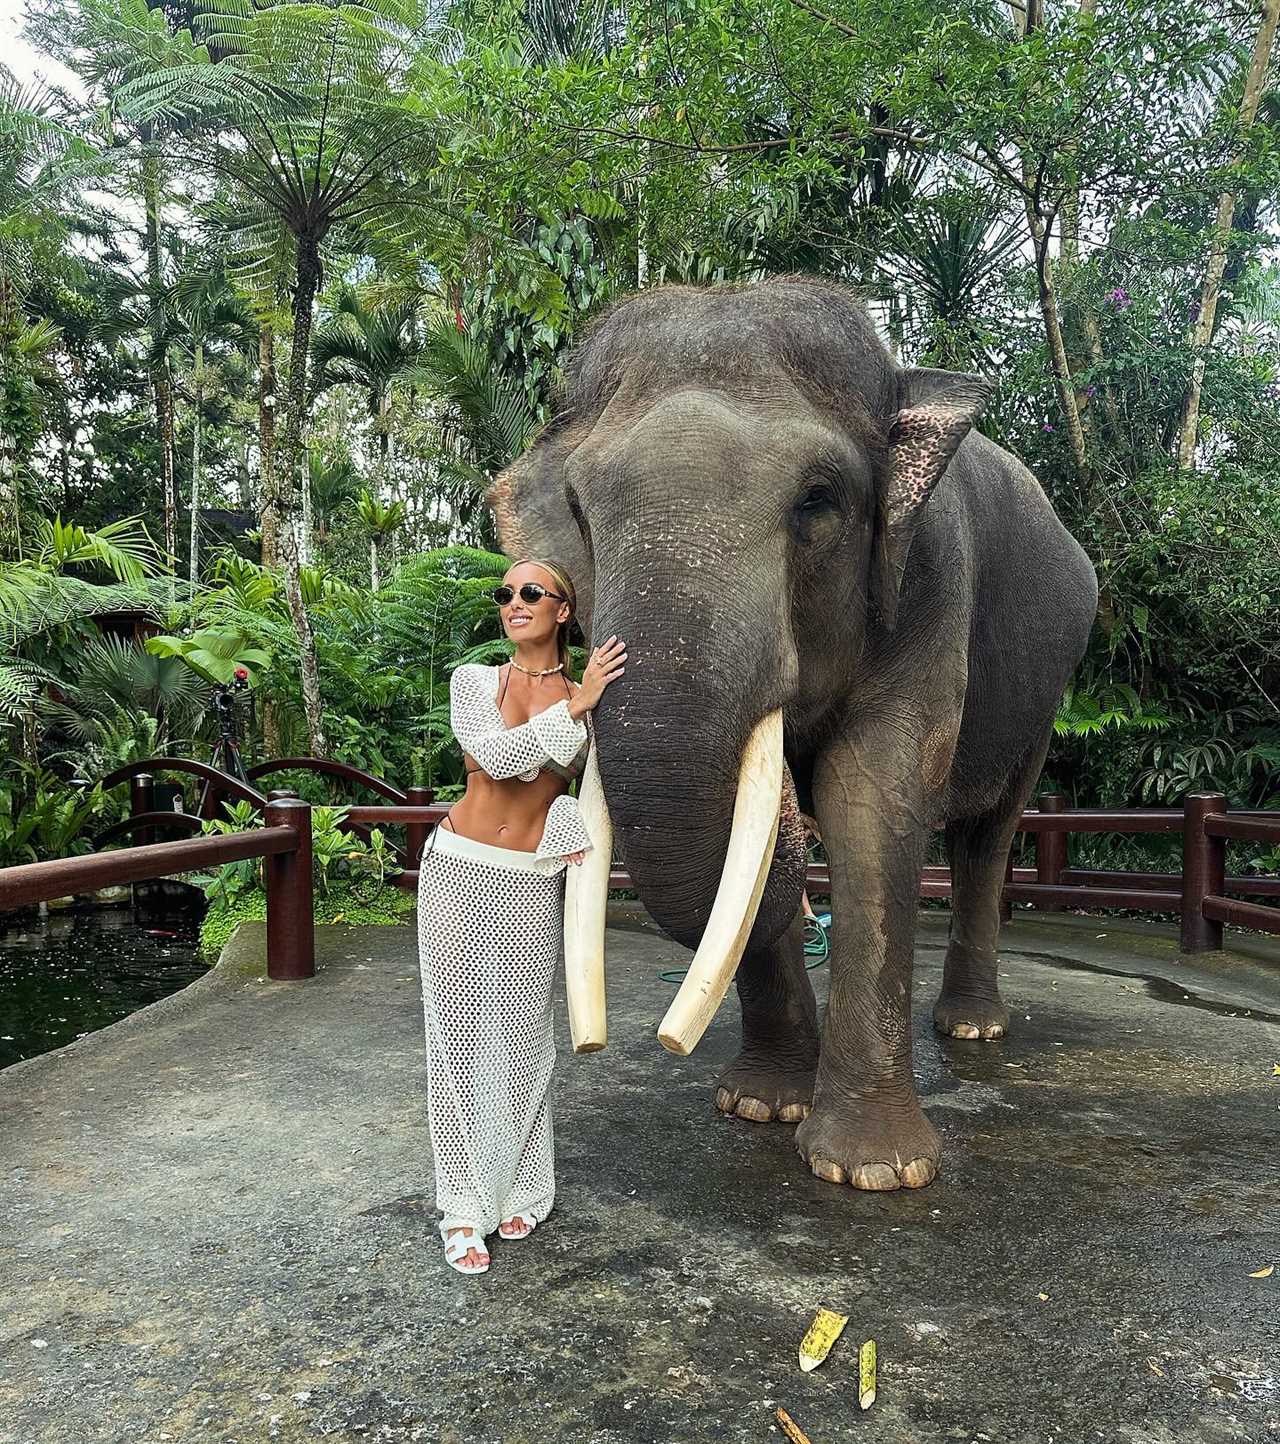 Towie's Amber Turner faces backlash over elephant tusks in holiday snap